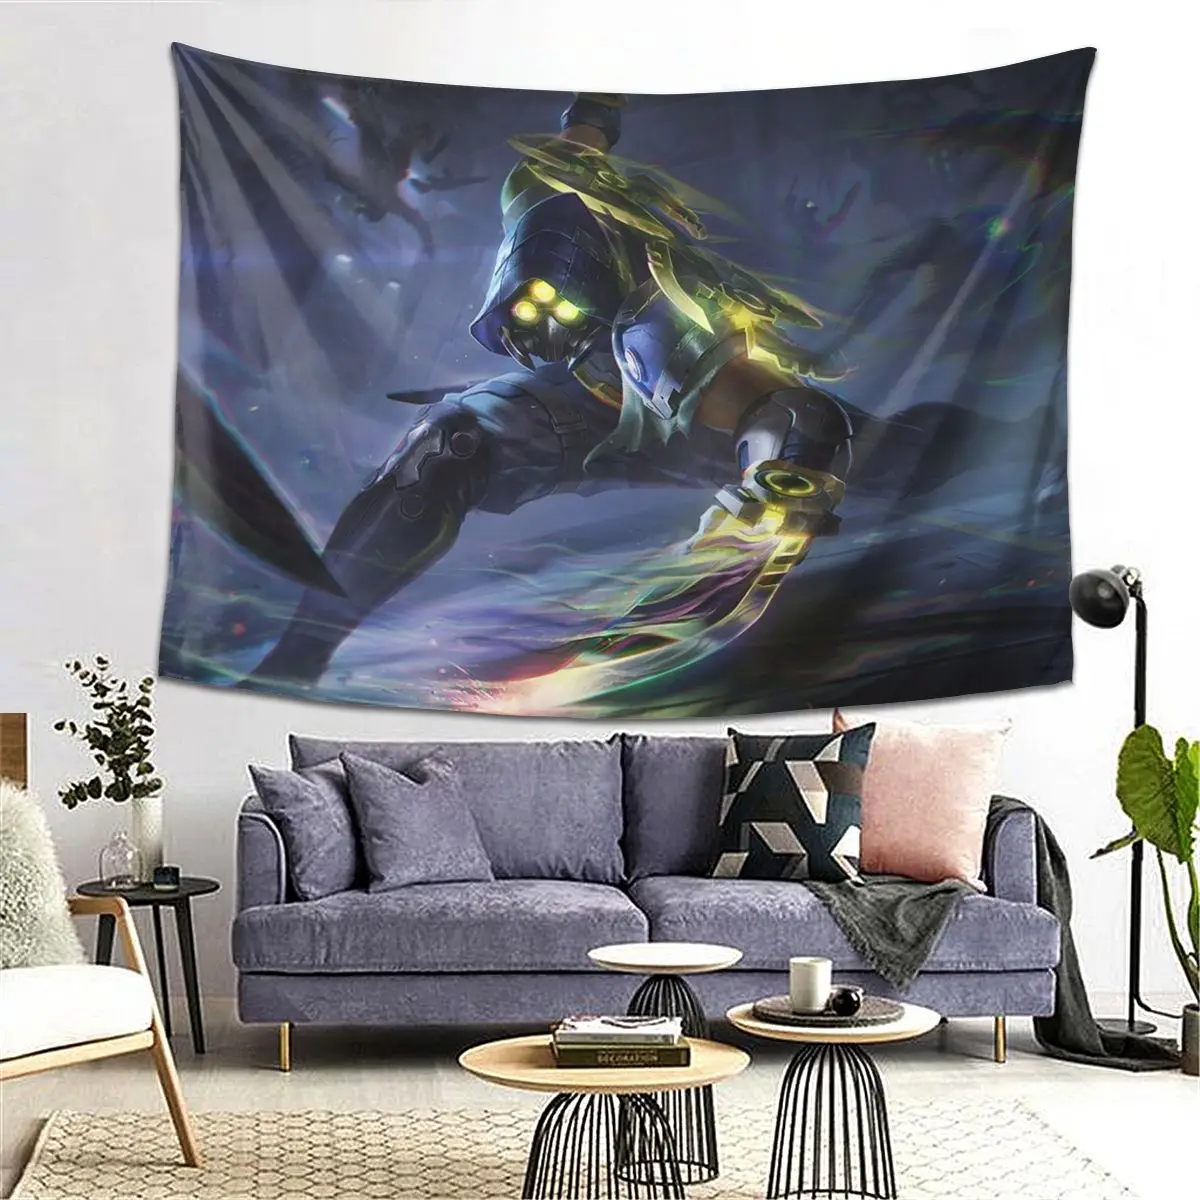 

2021 fashion home League Of Legends tapestry background wall room decoration aesthetic room decor tapiz